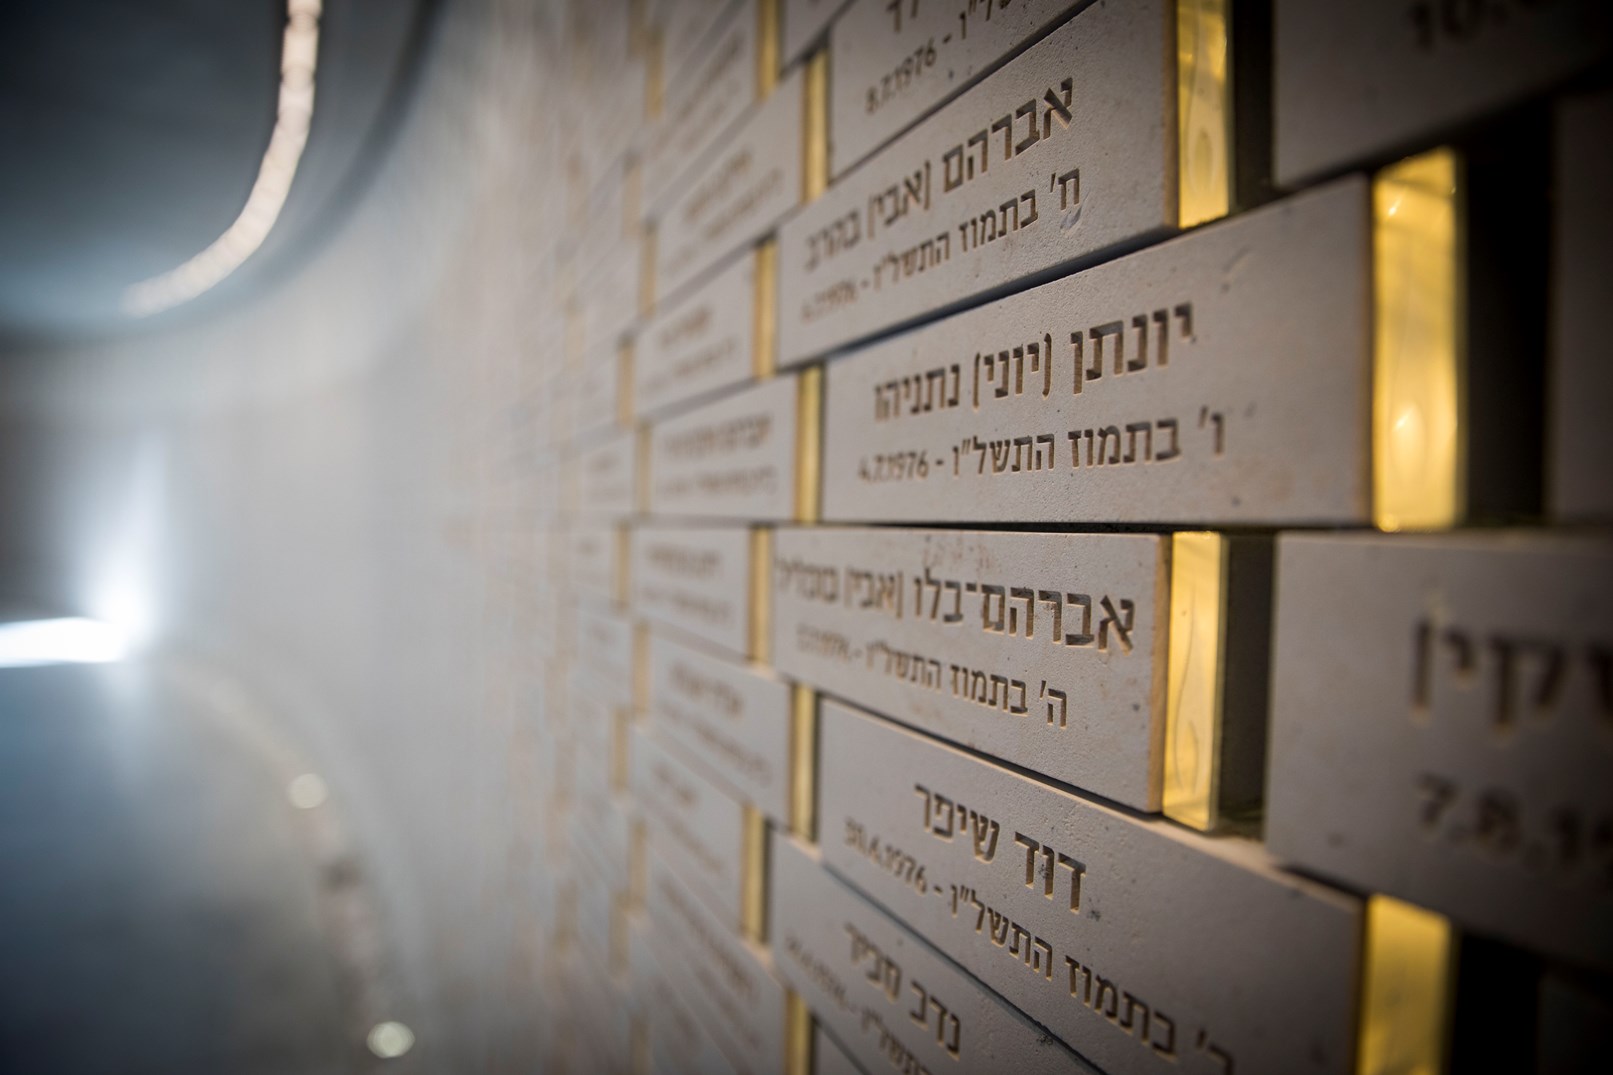 Bricks commemorate fallen soldiers at Israel’s new national Hall of Remembrance, Mount Herzl. Photo by Yonatan Sindel/FLASH90